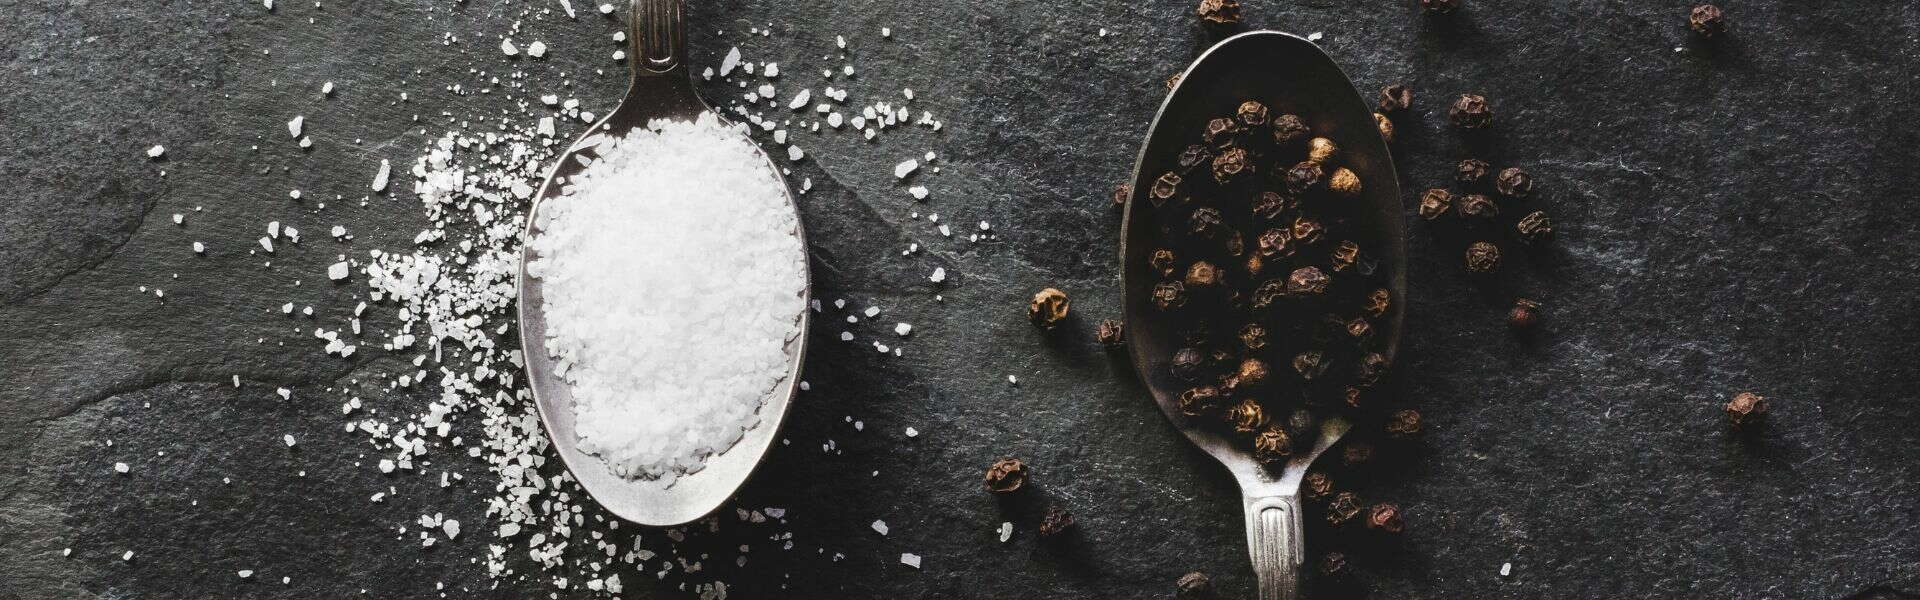 What is the role of salt in our diet?